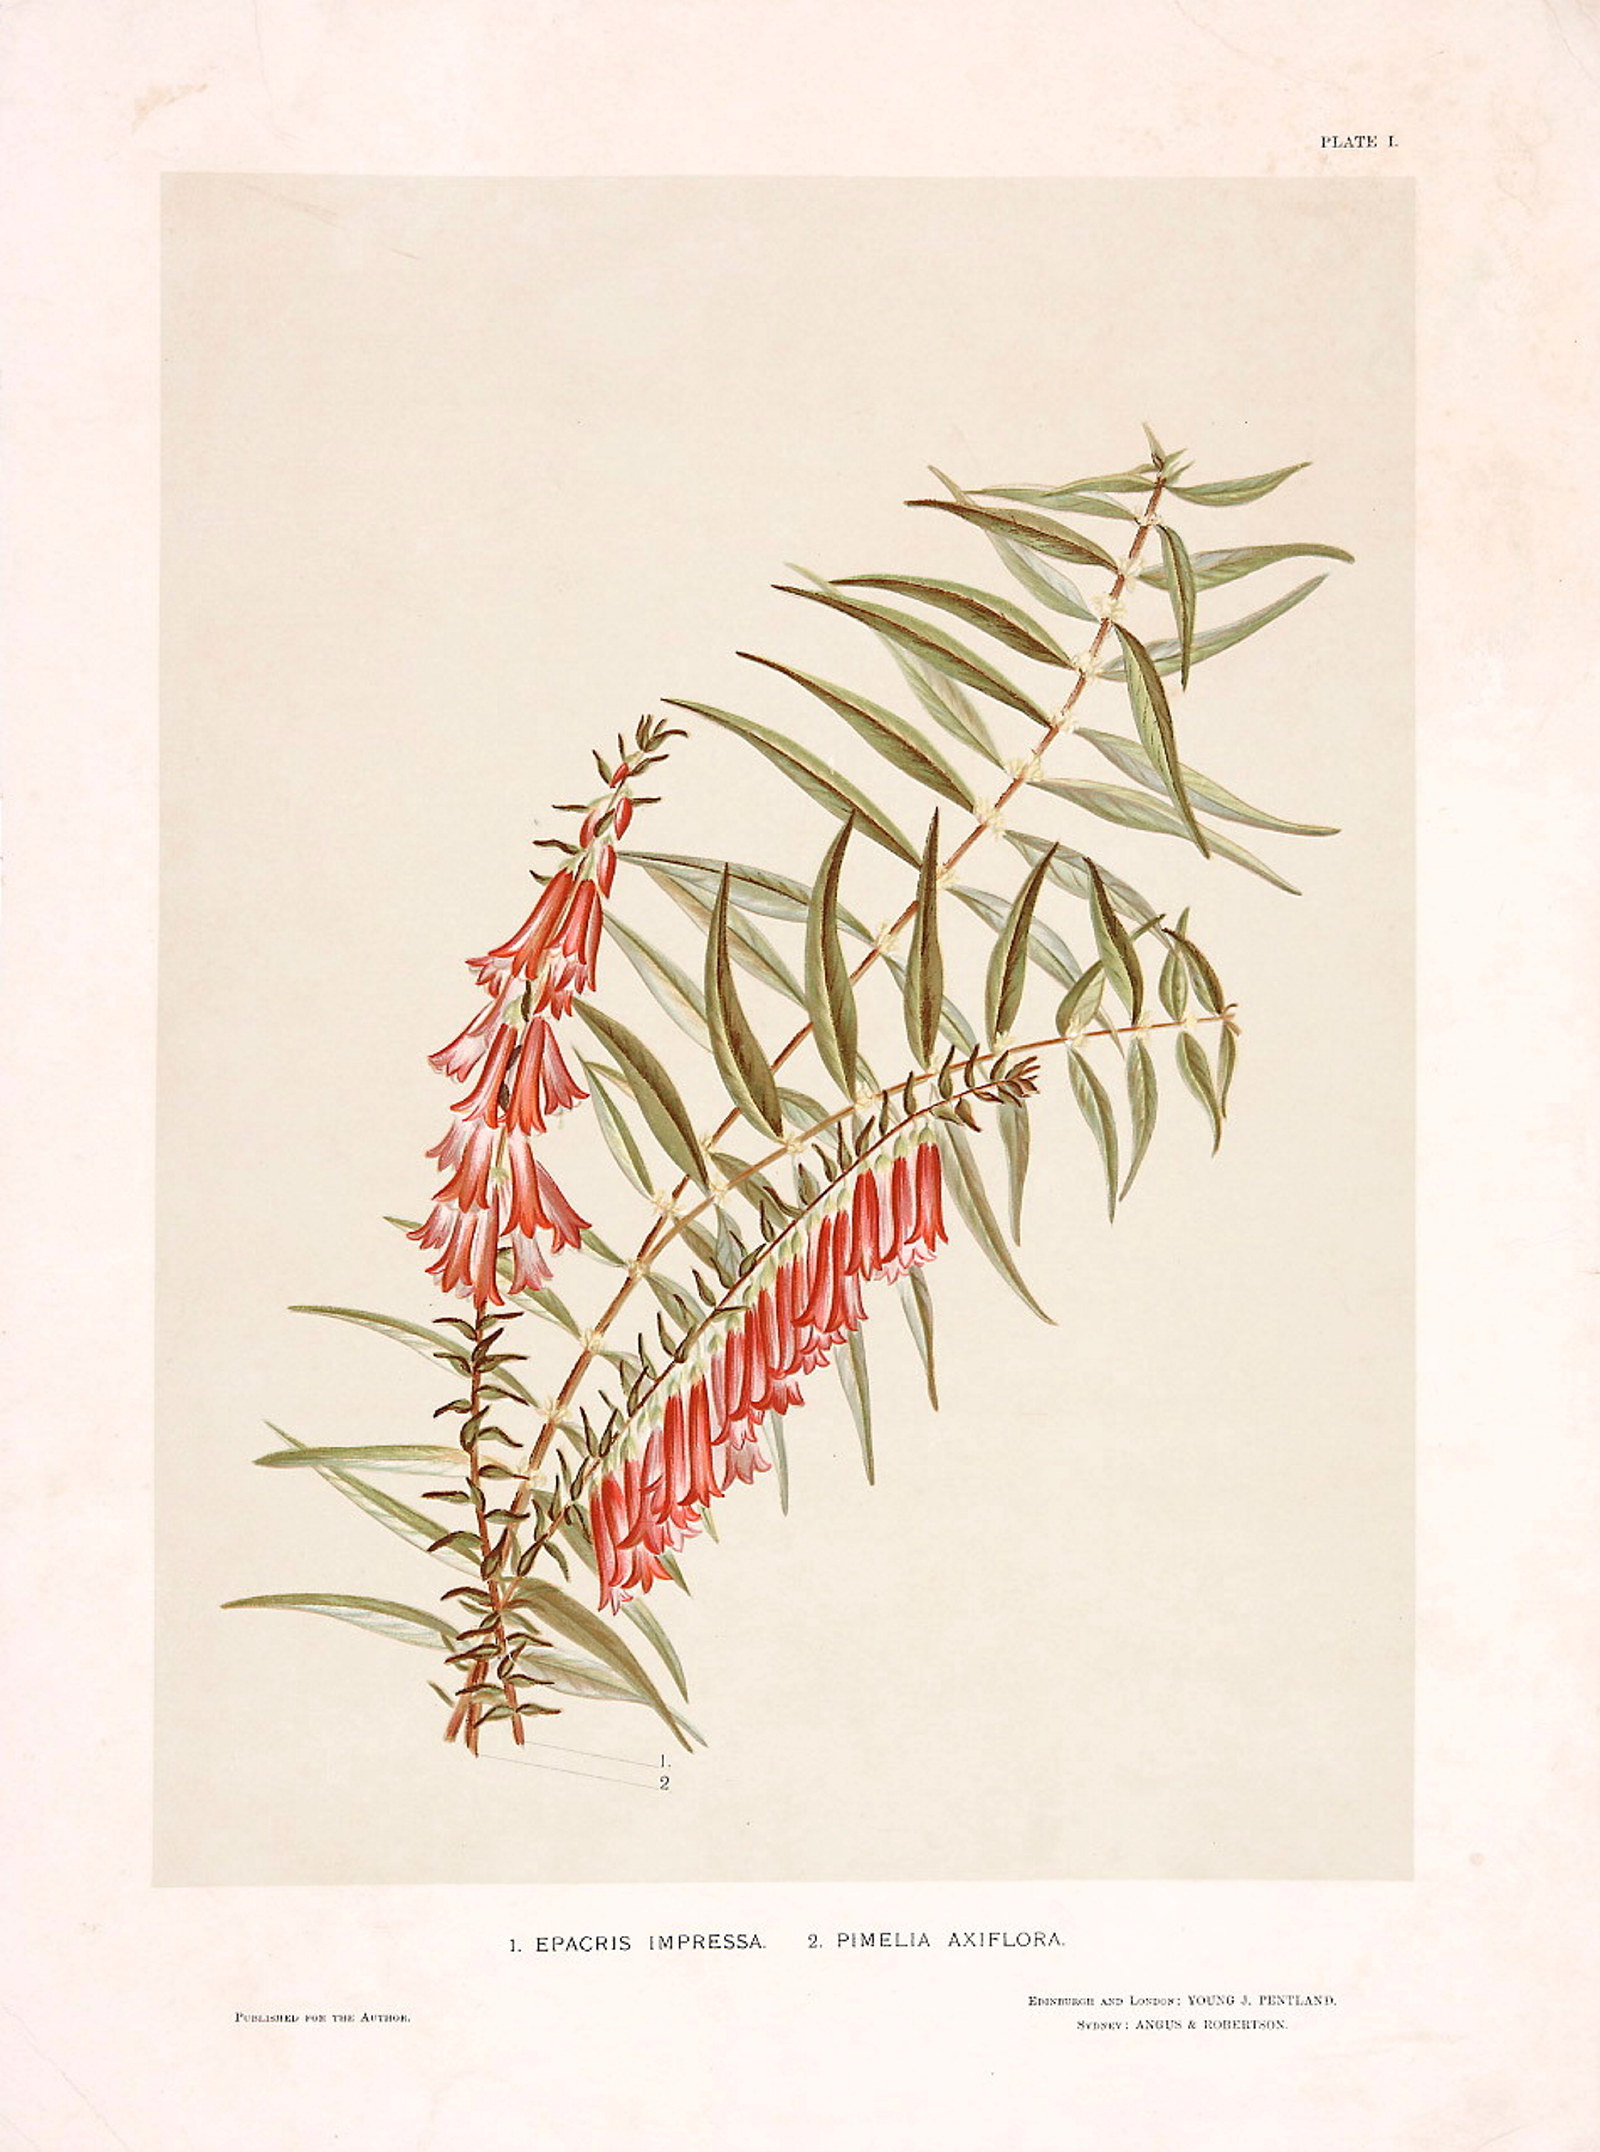 Print from book of red wildflowers.